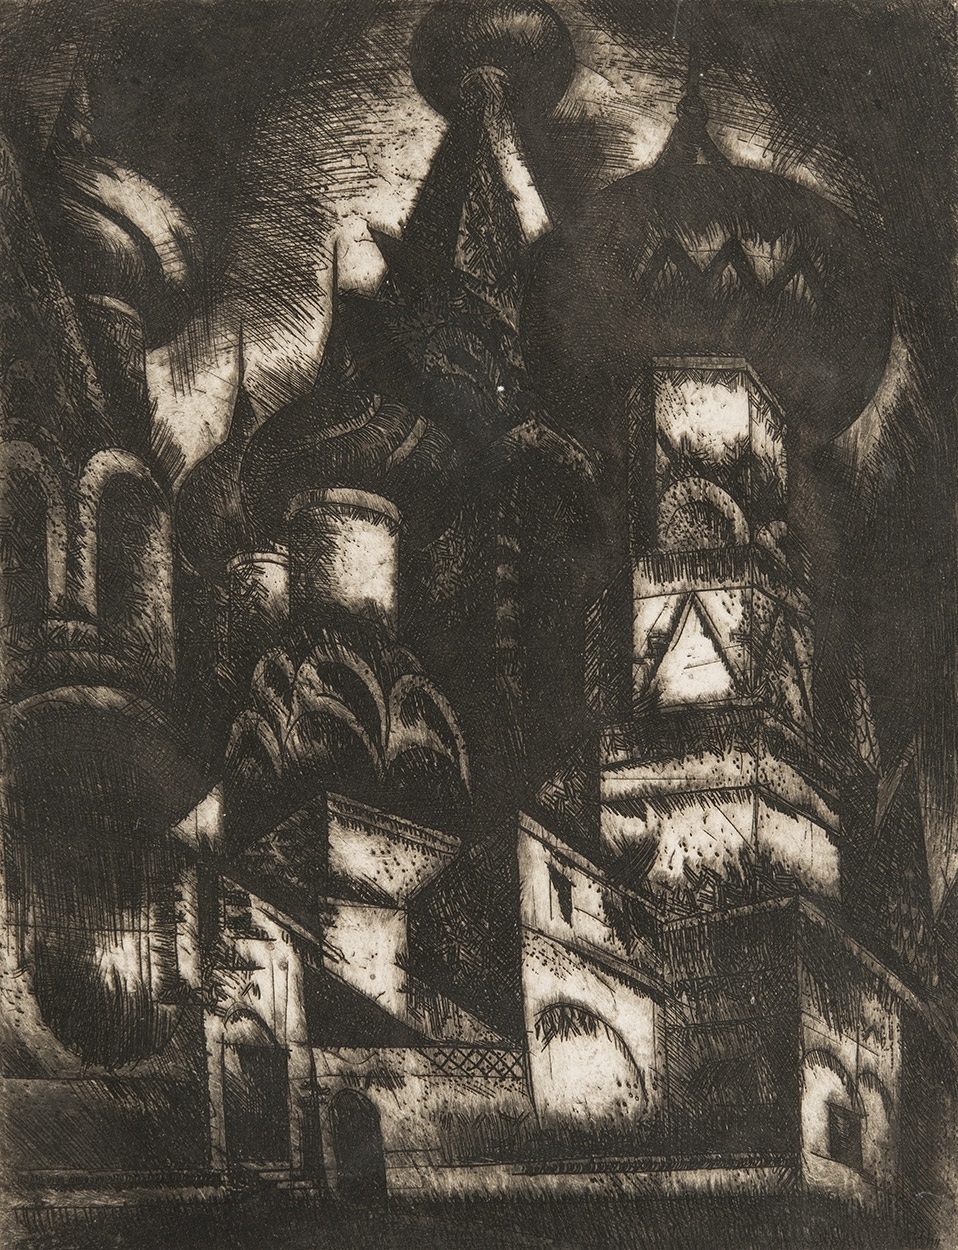 Uitz Béla (1887-1972) Bulbous Church, 1921-1922 (from the “Moscow” zink scratch-series)